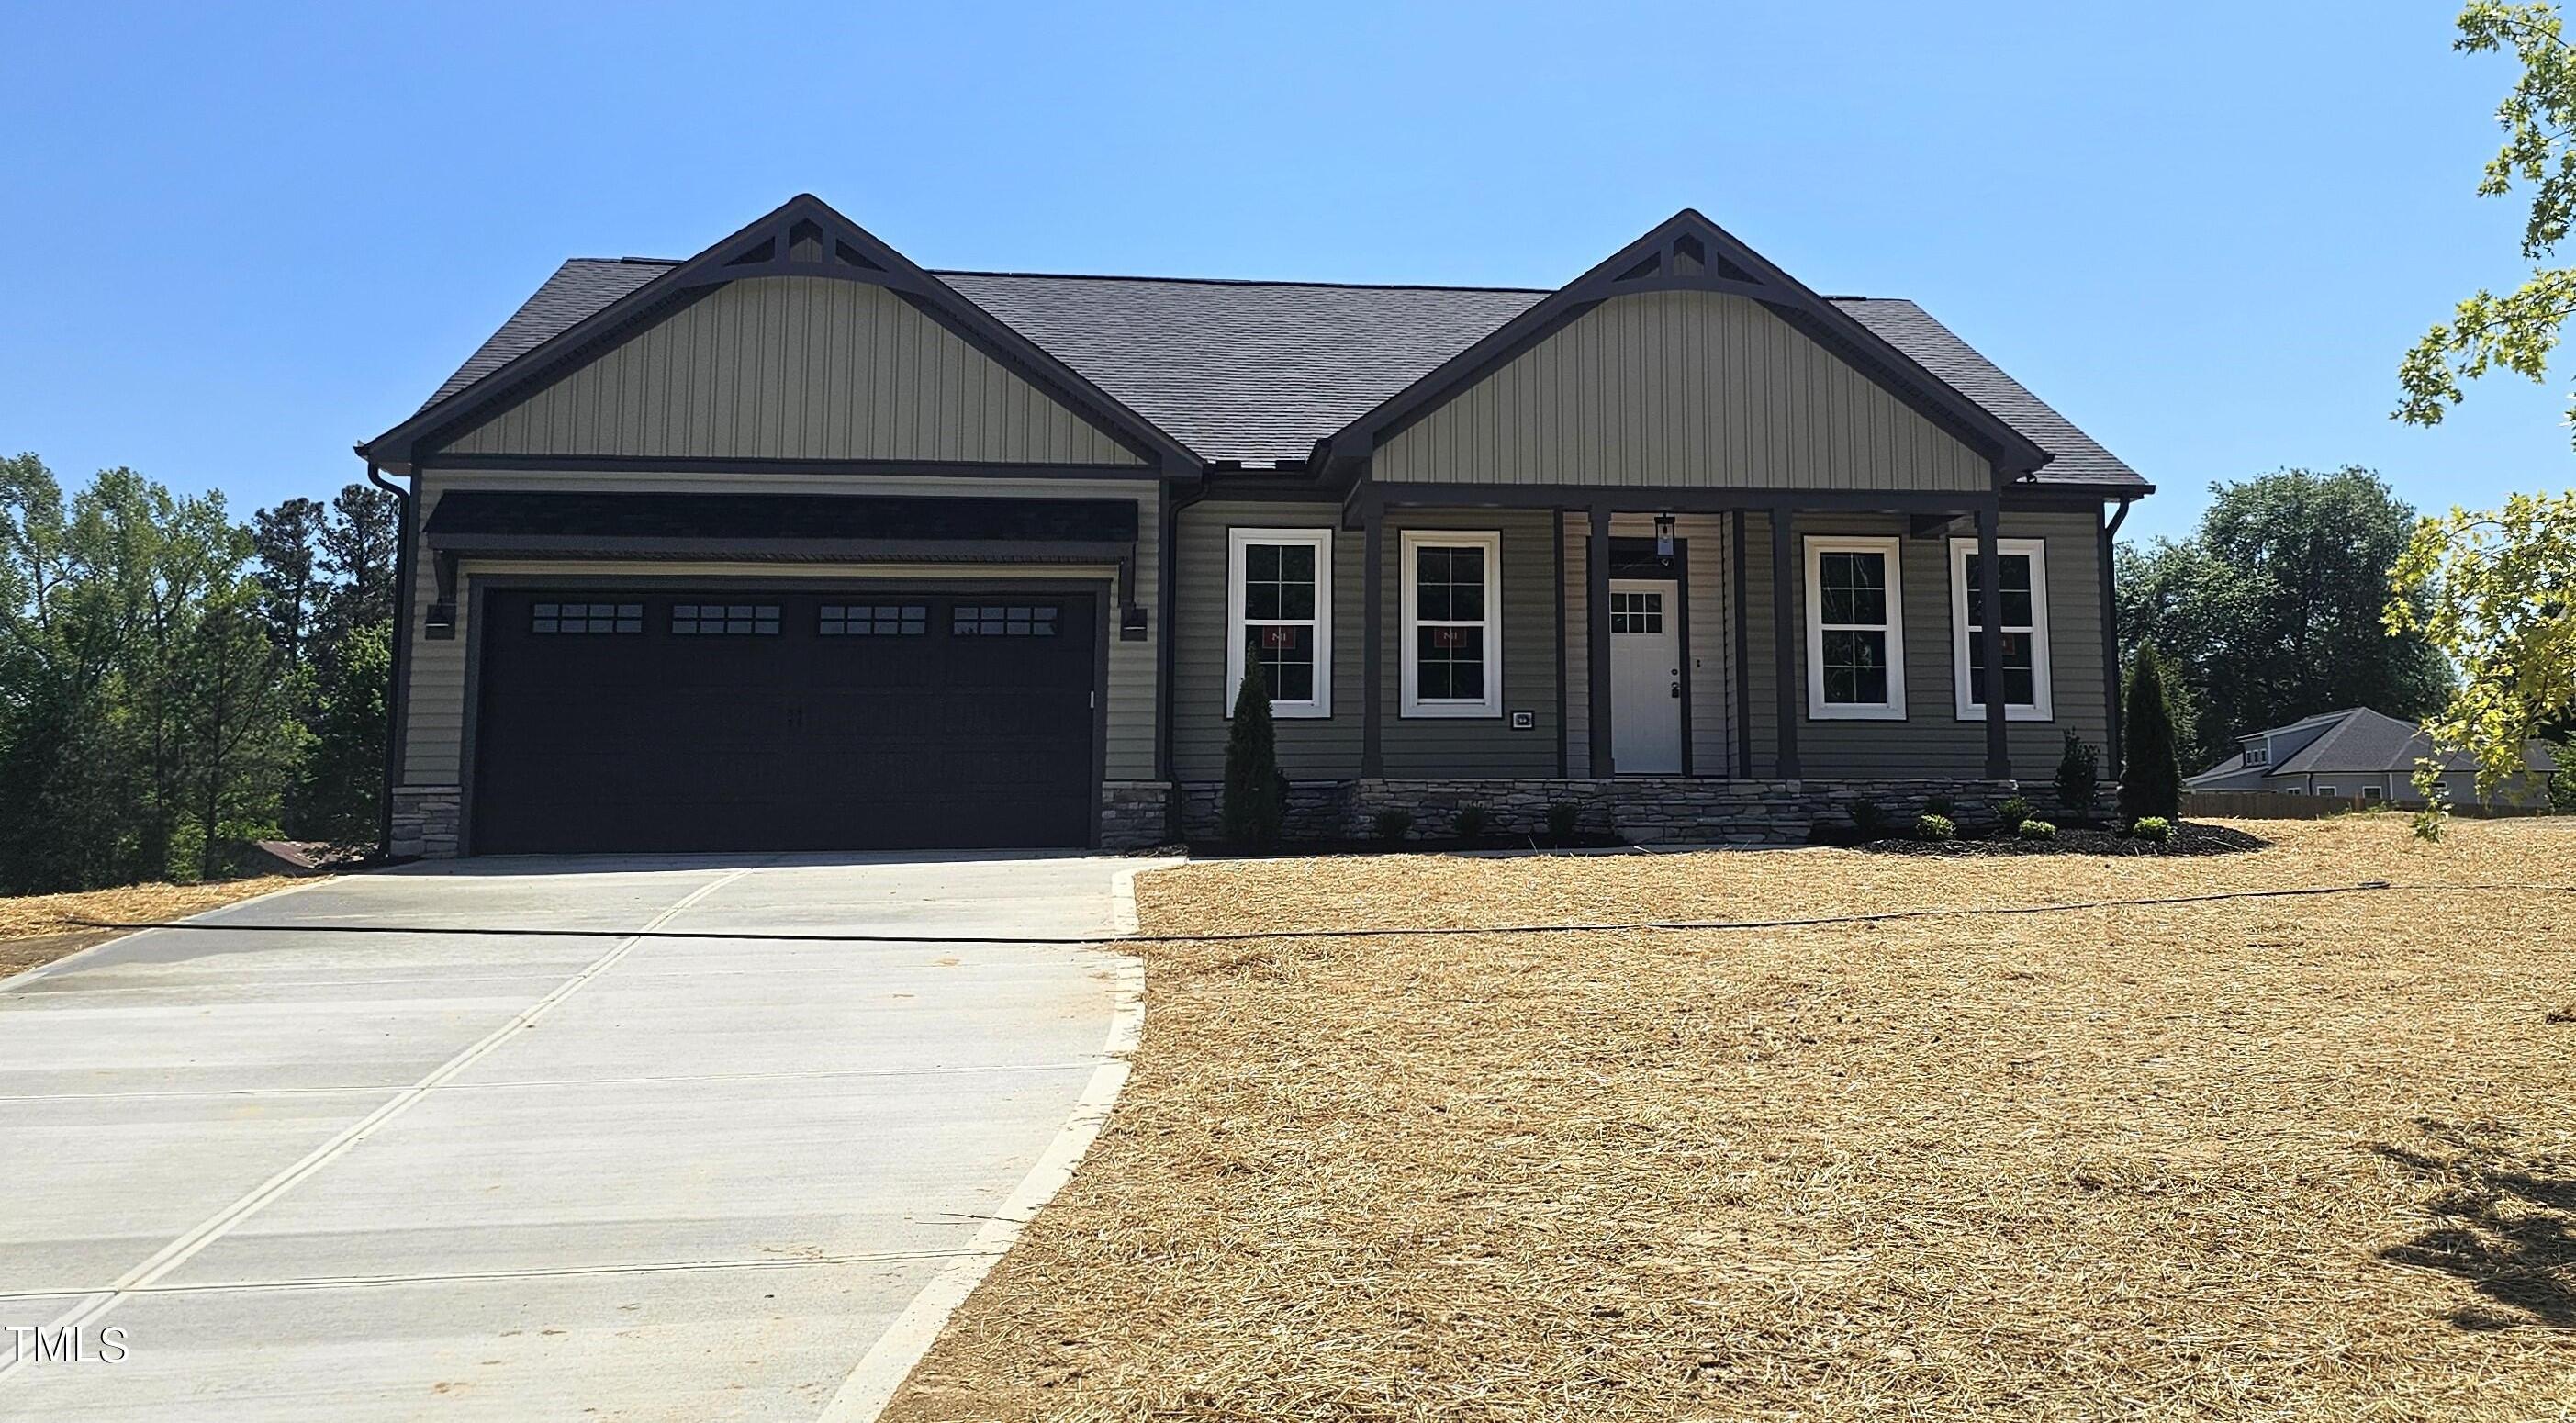 Photo one of 30 Weathered Oak Way Youngsville NC 27596 | MLS 10018664